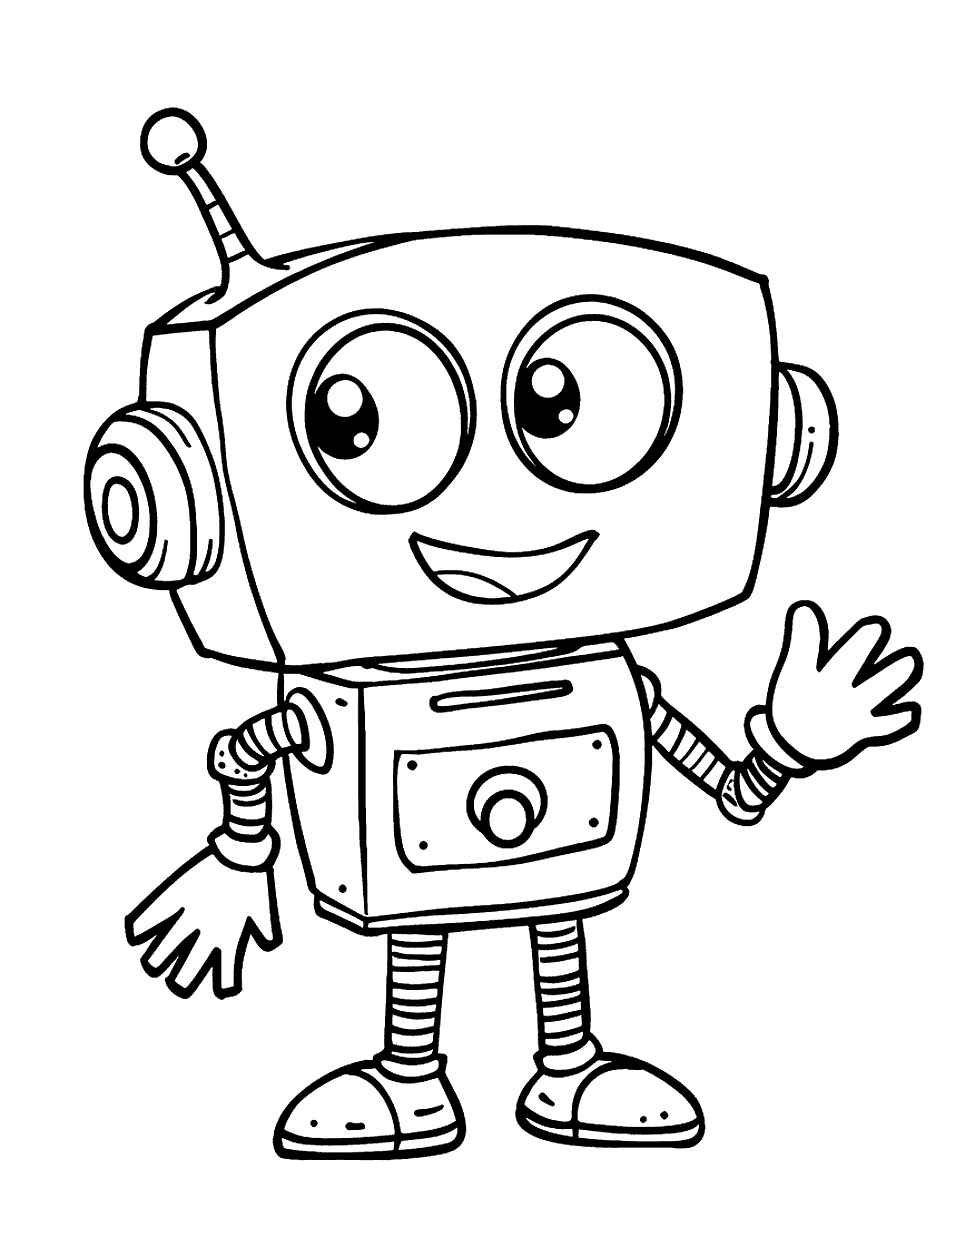 Robot Friend Toddler Coloring Page - A cartoonish robot with a big smile, waving hello.